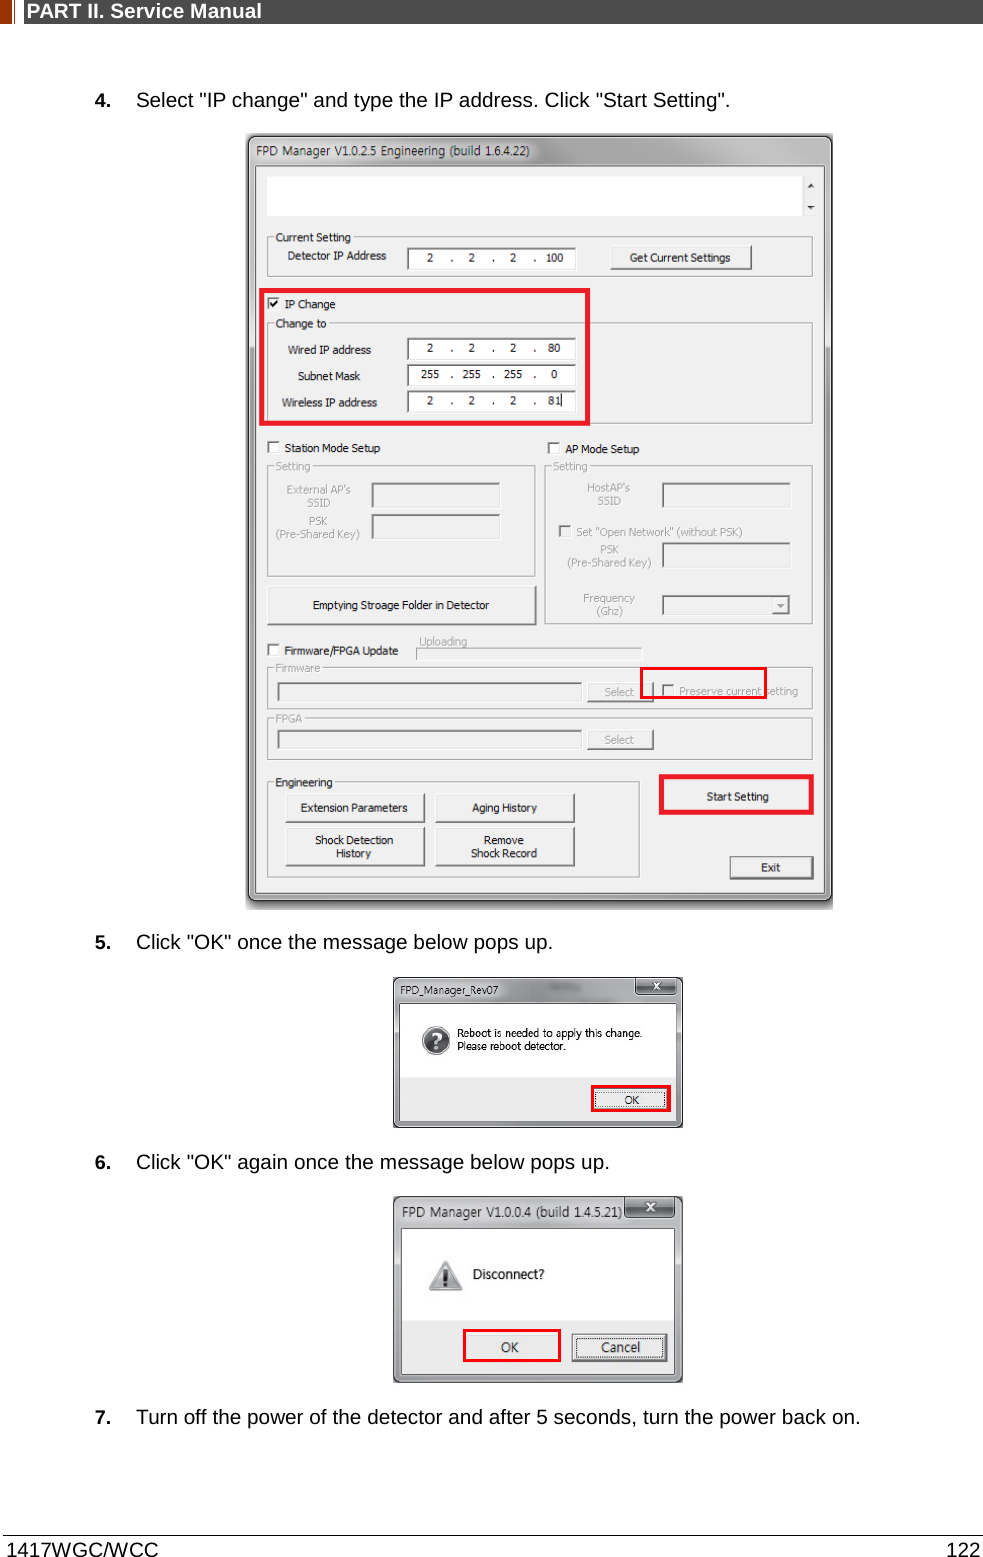 PART II. Service Manual  1417WGC/WCC 122 4. Select &quot;IP change&quot; and type the IP address. Click &quot;Start Setting&quot;.  5. Click &quot;OK&quot; once the message below pops up.  6. Click &quot;OK&quot; again once the message below pops up.  7. Turn off the power of the detector and after 5 seconds, turn the power back on.  